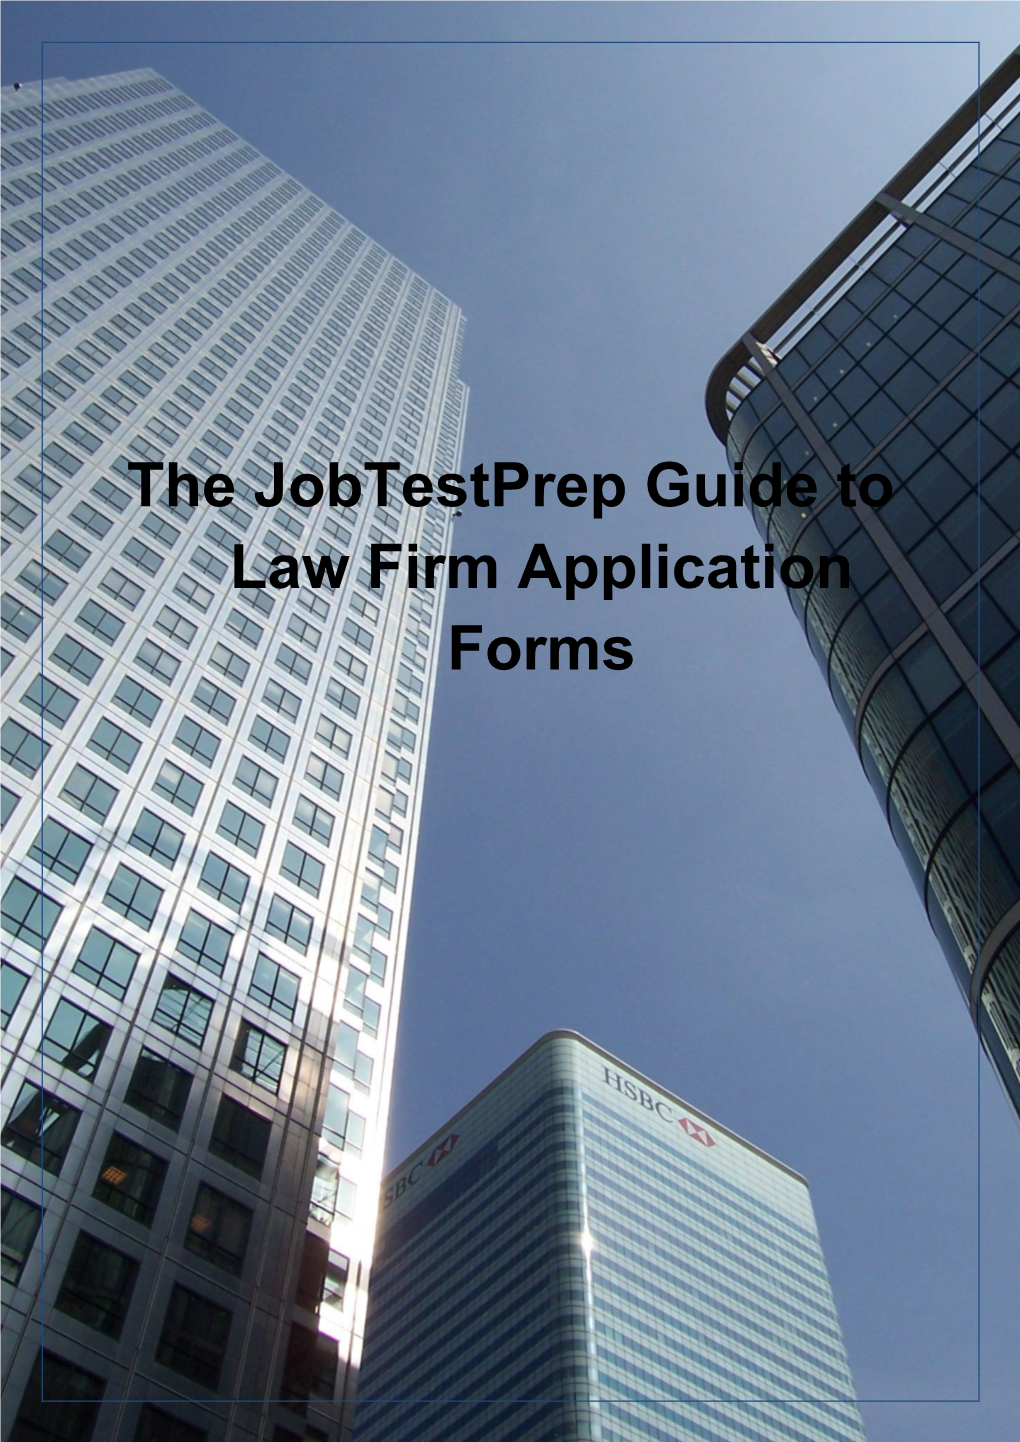 The Jobtestprep Guide to Law Firm Application Forms